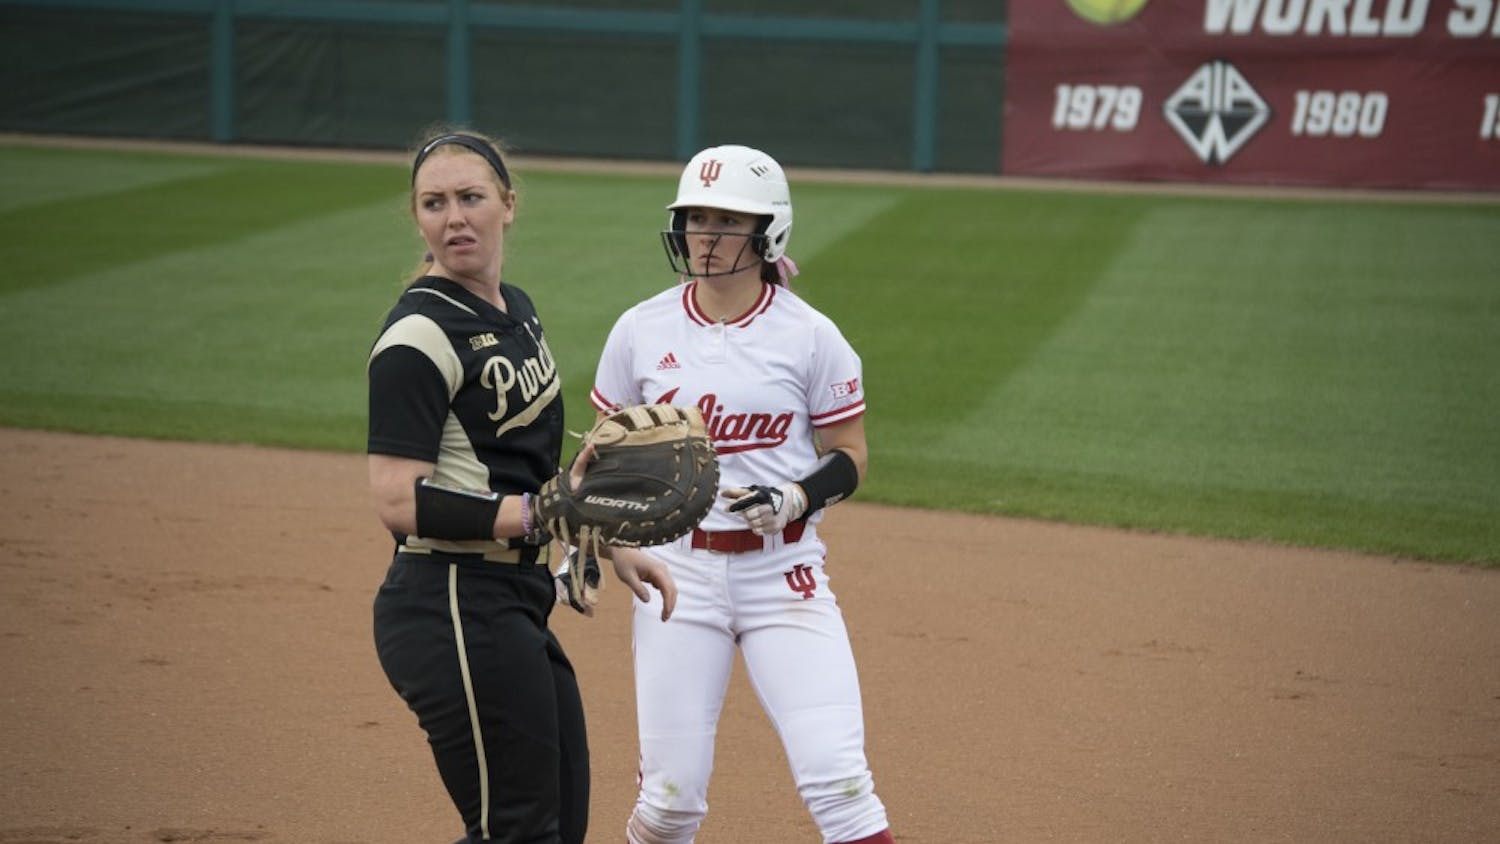 Gabbi Jenkins runs back to first after taking a bold lead off first base.  The lefty had the first hit of the game in the double header against Purdue.